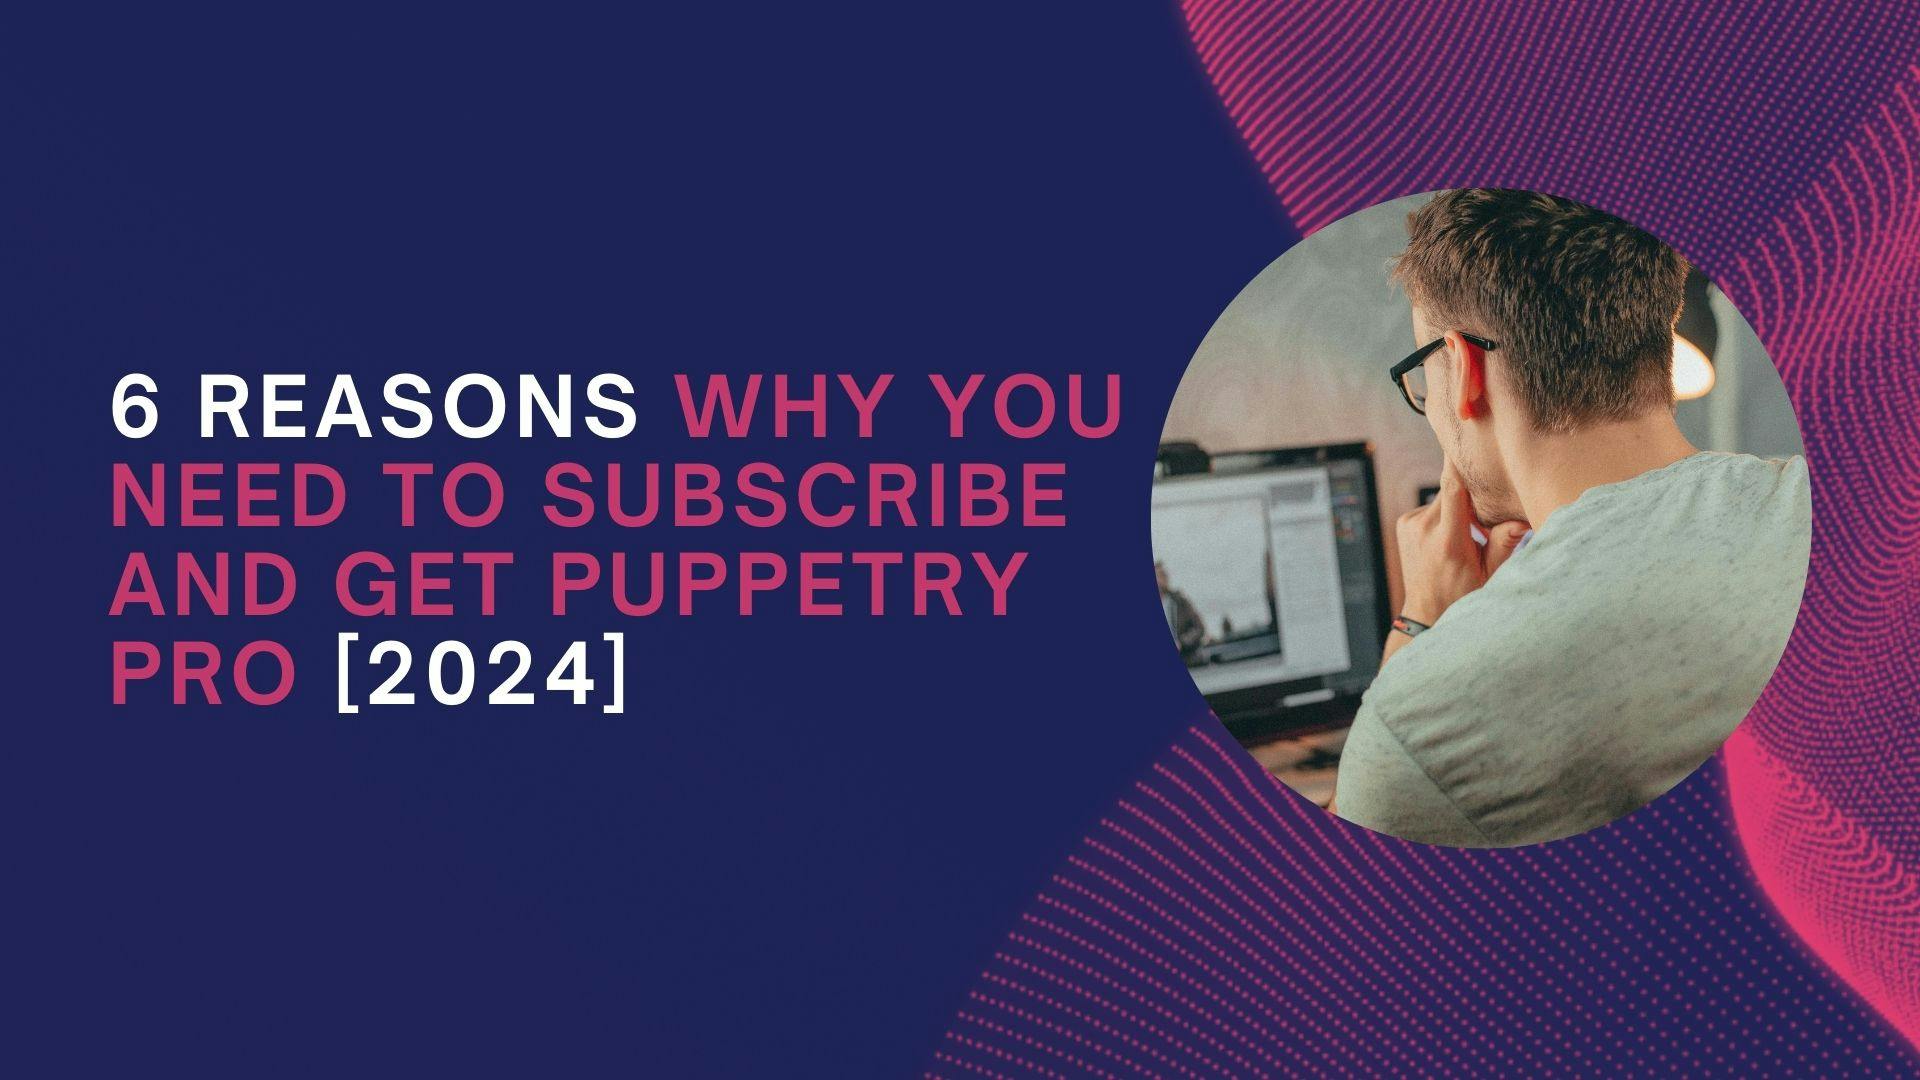 6 Reasons Why You Need To Subscribe and Get Puppetry Pro in 2024